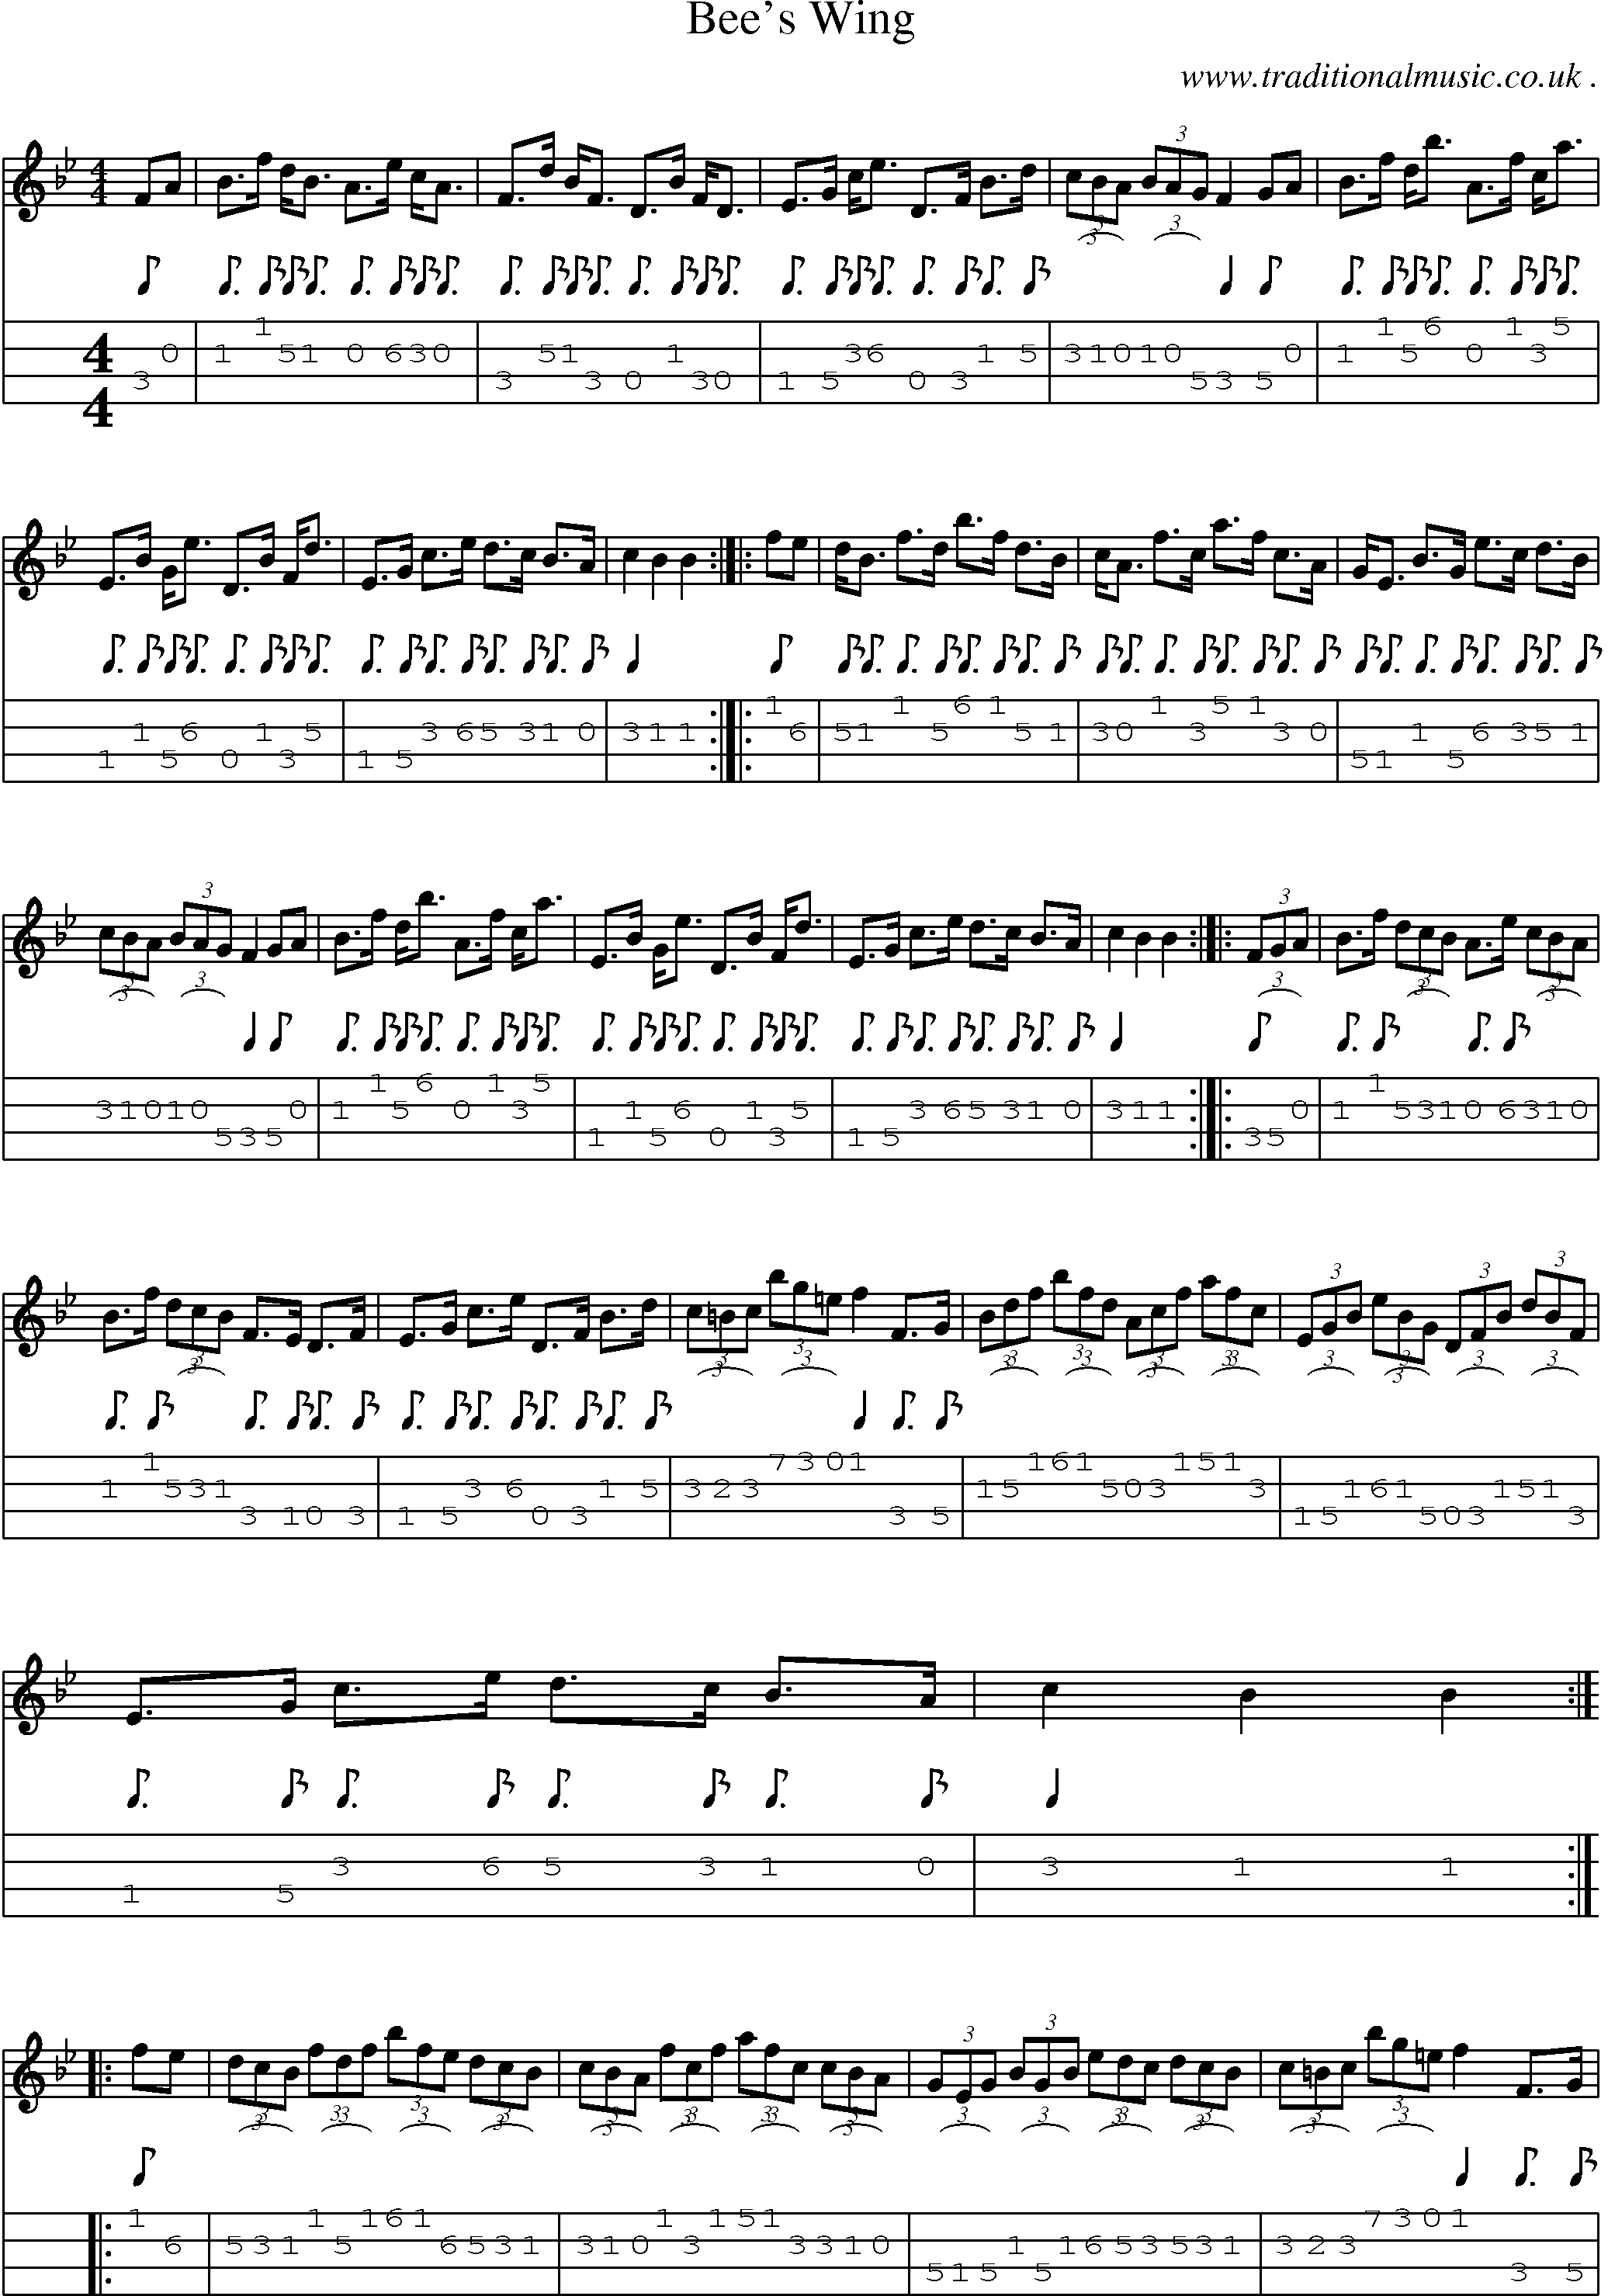 Sheet-Music and Mandolin Tabs for Bees Wing